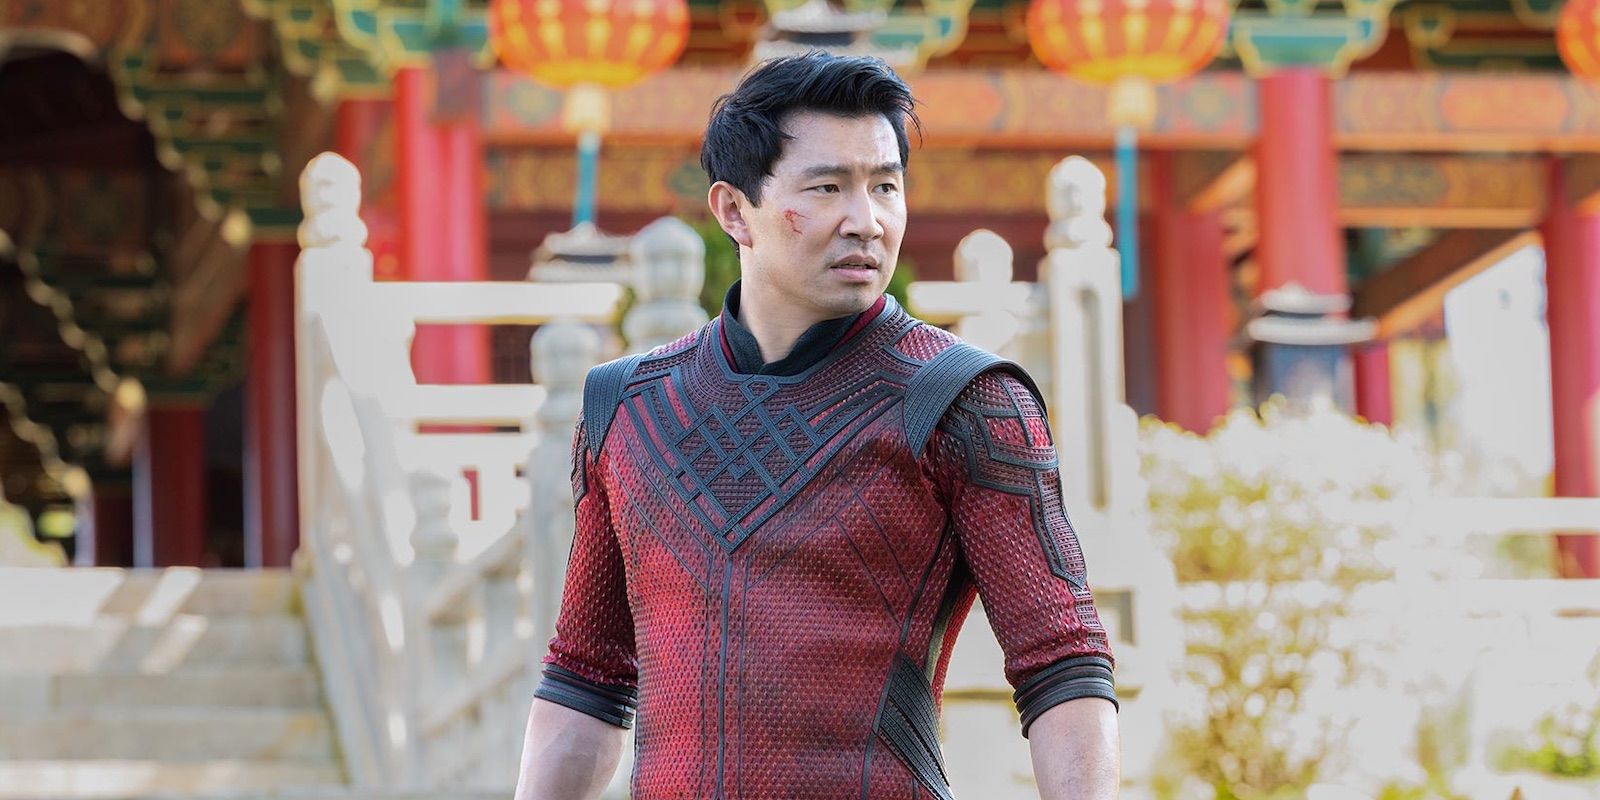 Simu Liu in costume outside a temple in Shang-Chi and the Legend of the Ten Rings